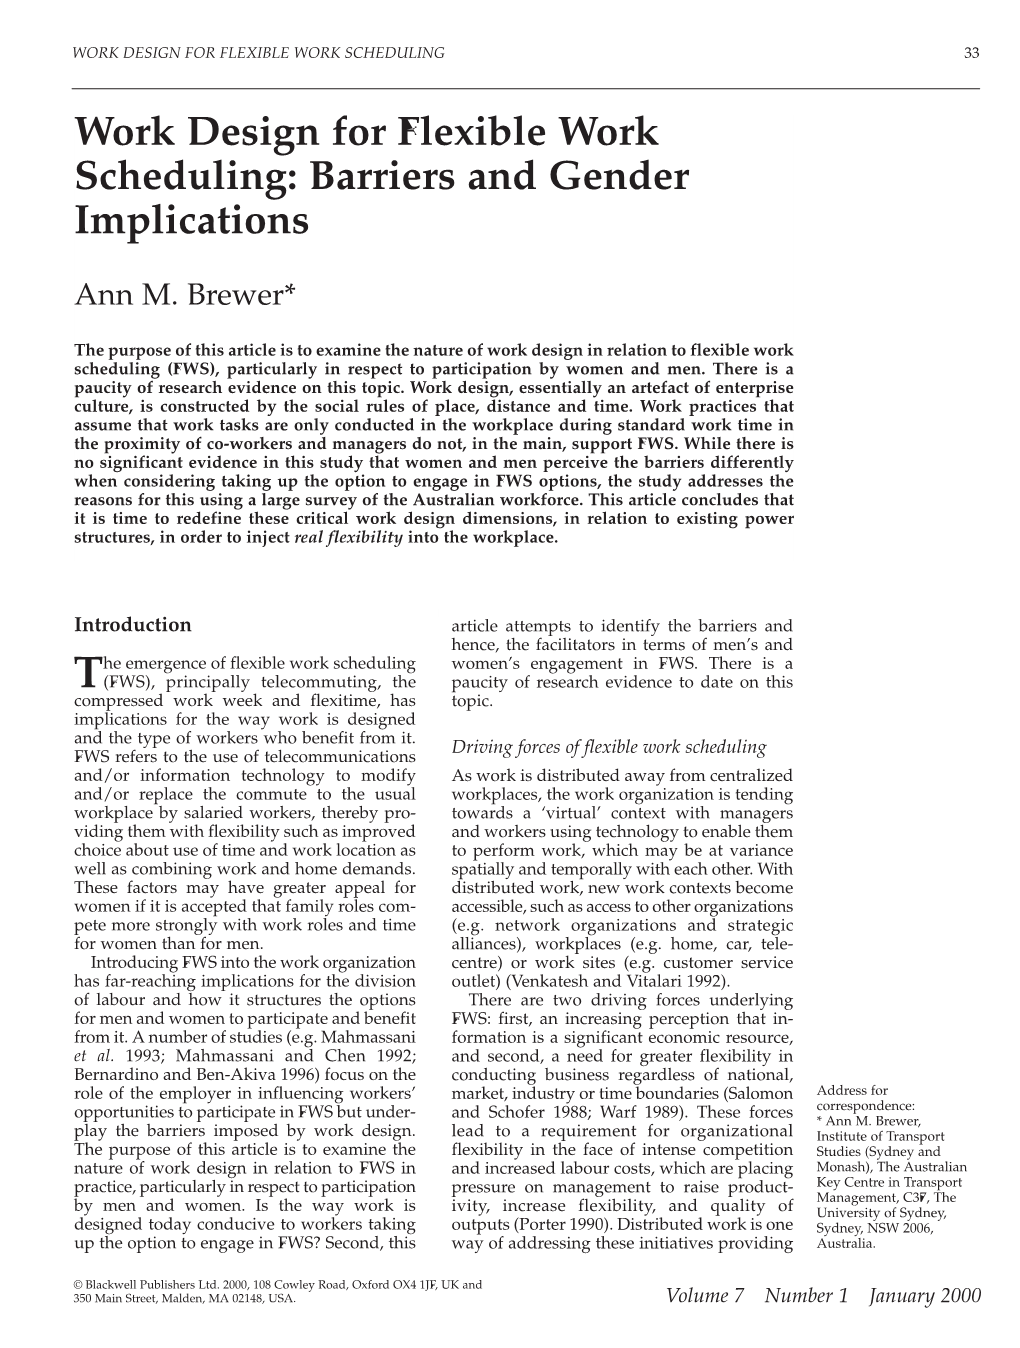 Work Design for Flexible Work Scheduling: Barriers and Gender Implications